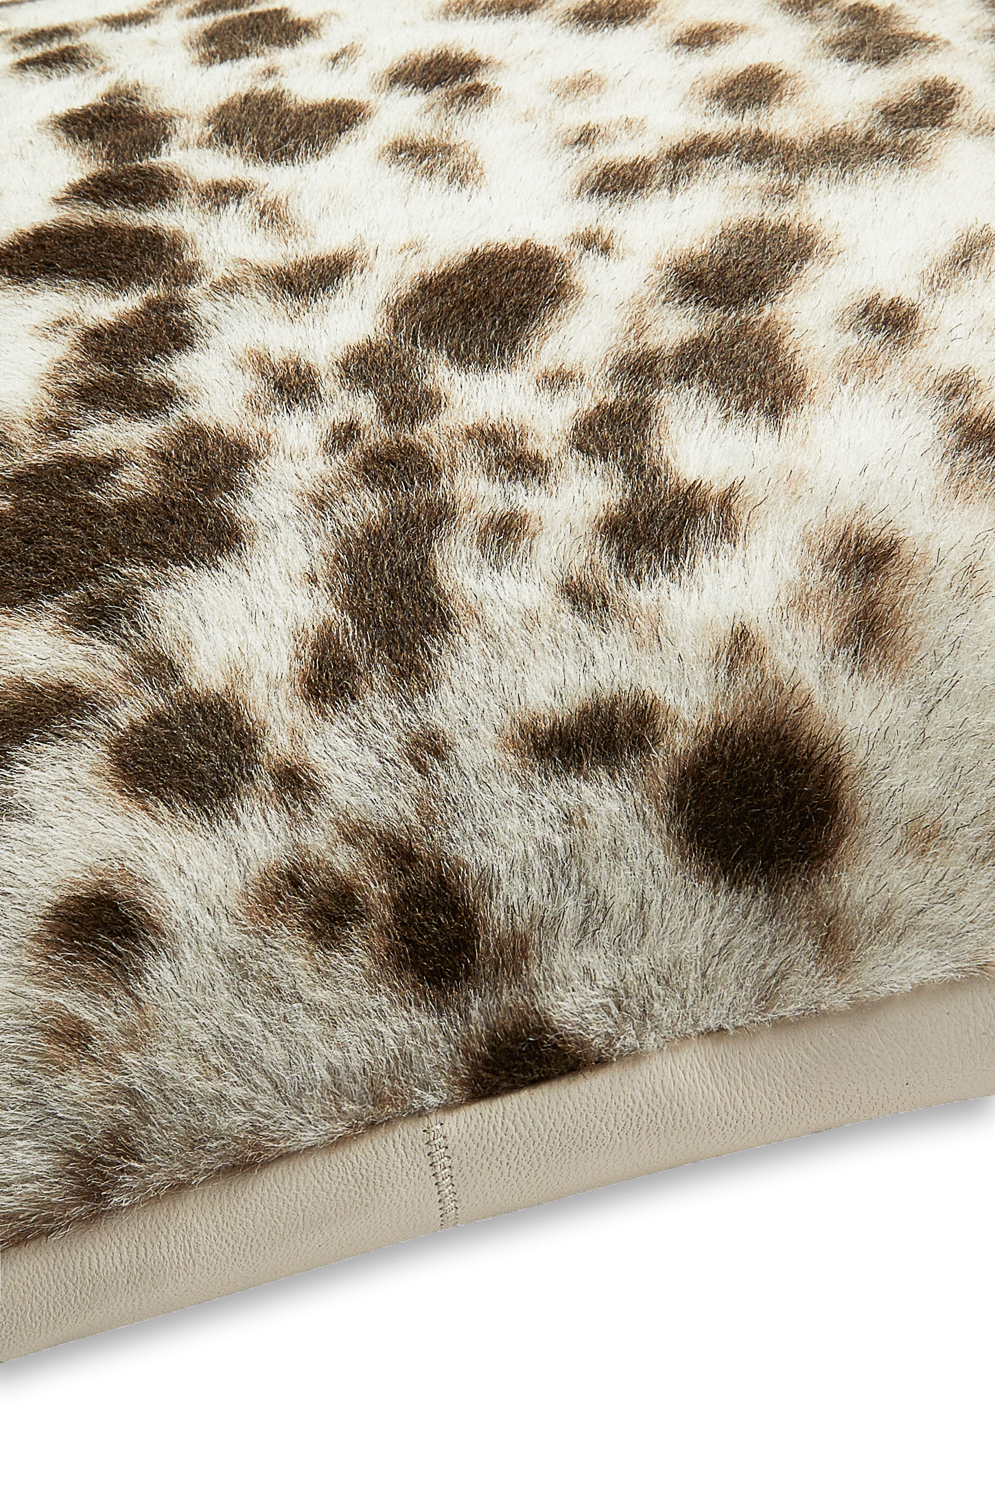 Naturally Spotted Shearling Cushion | Homeware | Gushlow & Cole - cut out crop